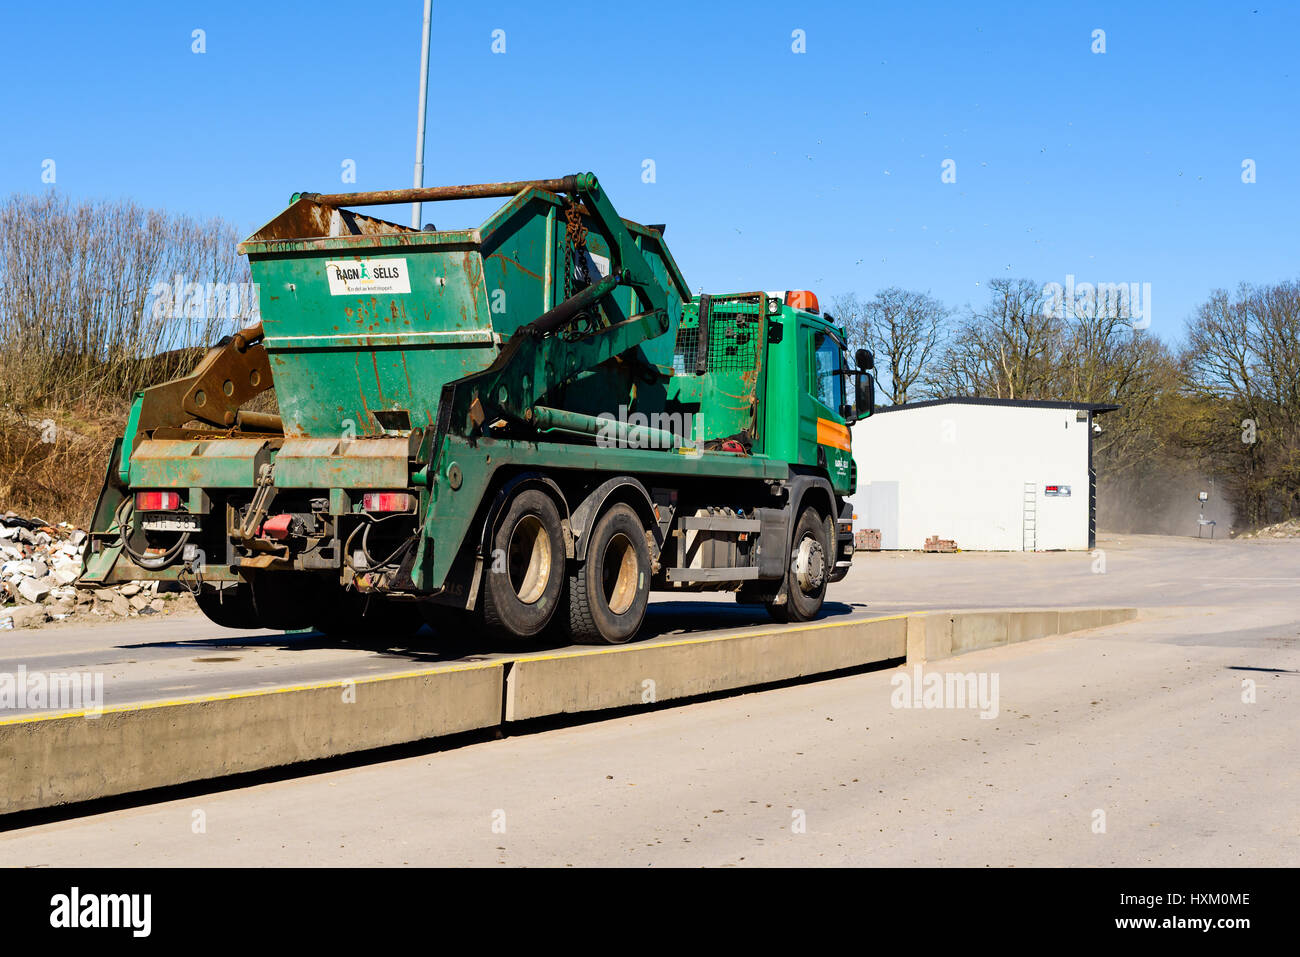 Ronneby, Sweden - March 27, 2017: Documentary of waste management. Green container truck Scania P420 being weighed on a truck scale before entering ga Stock Photo